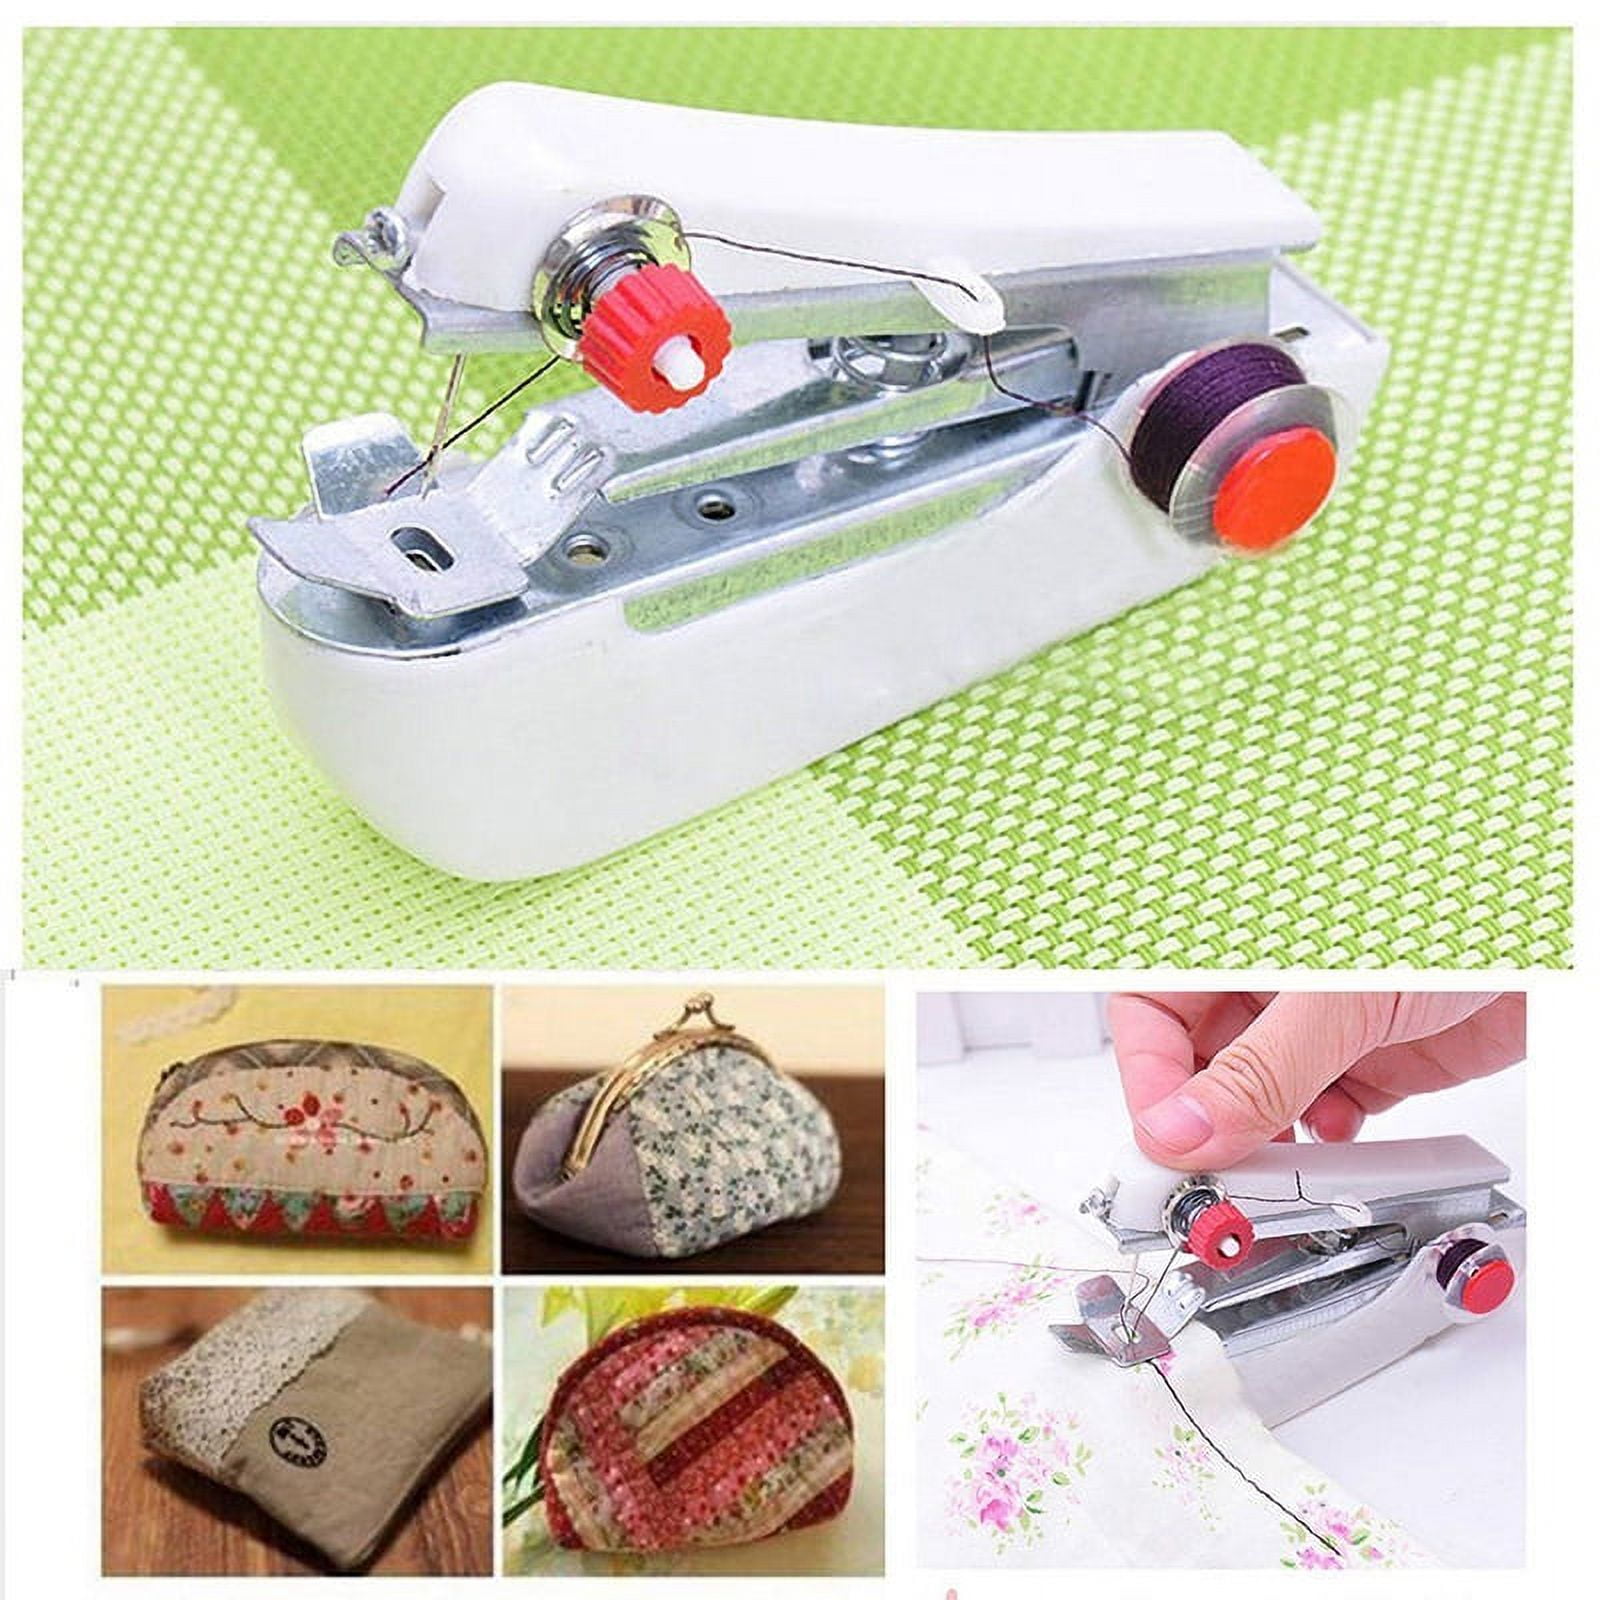 Buy Mini Hand Sewing & Sealing Machine for Quick and Easy Sewing, Stapler  Style Compact Stitching Machine - Multicolored Manual Sewing Machine (  Built-in Stitches 1) at Sehgall